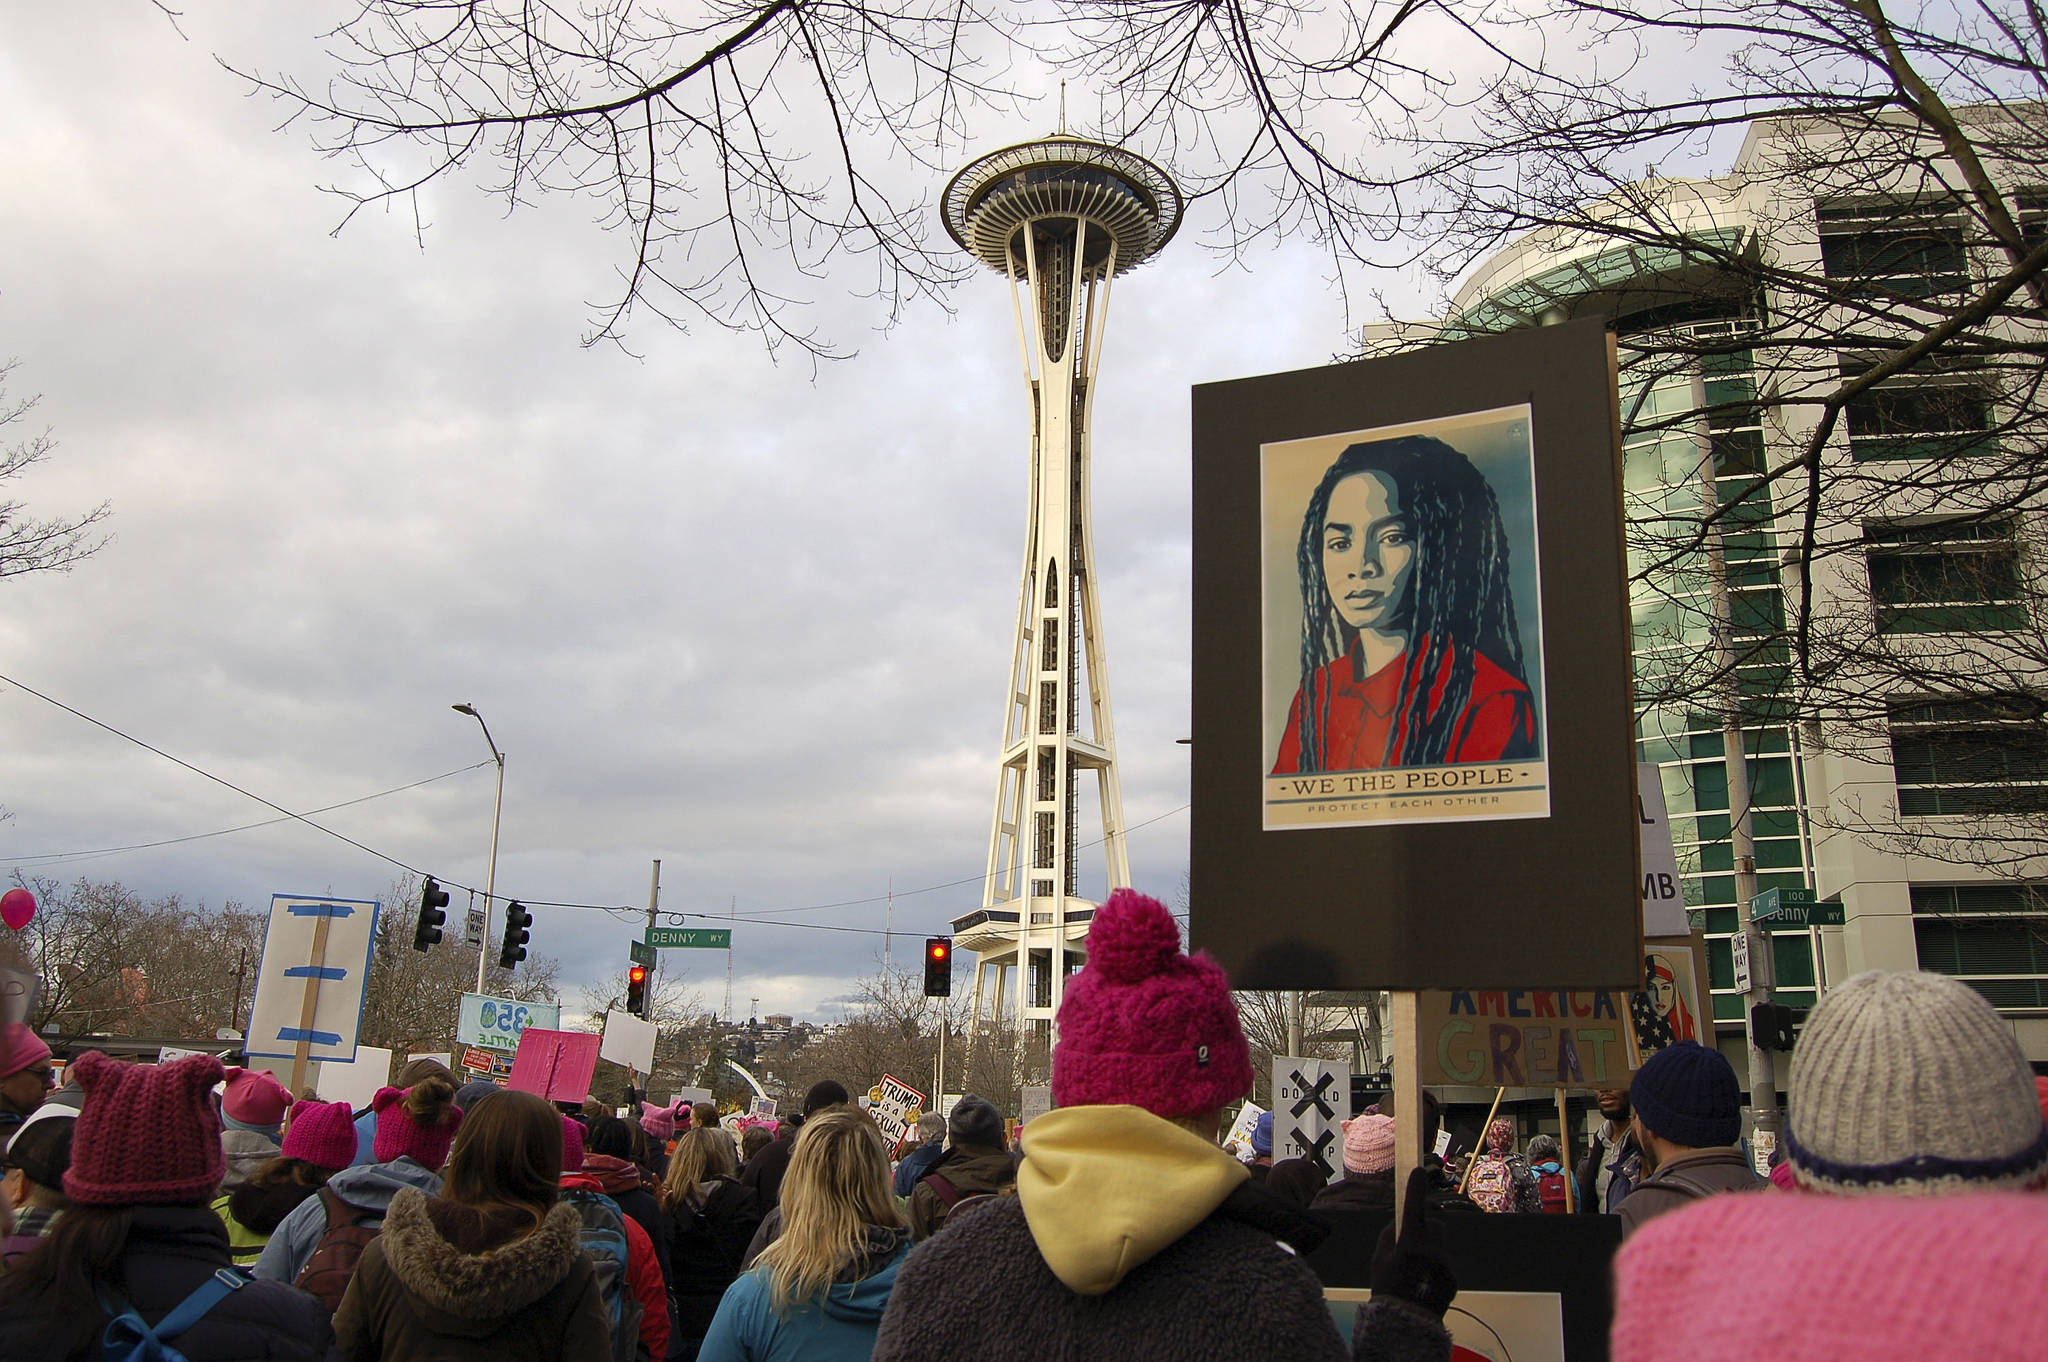 Men and women march in the Seattle Womxn’s March on inauguration day. Photo by Erin Hawkins